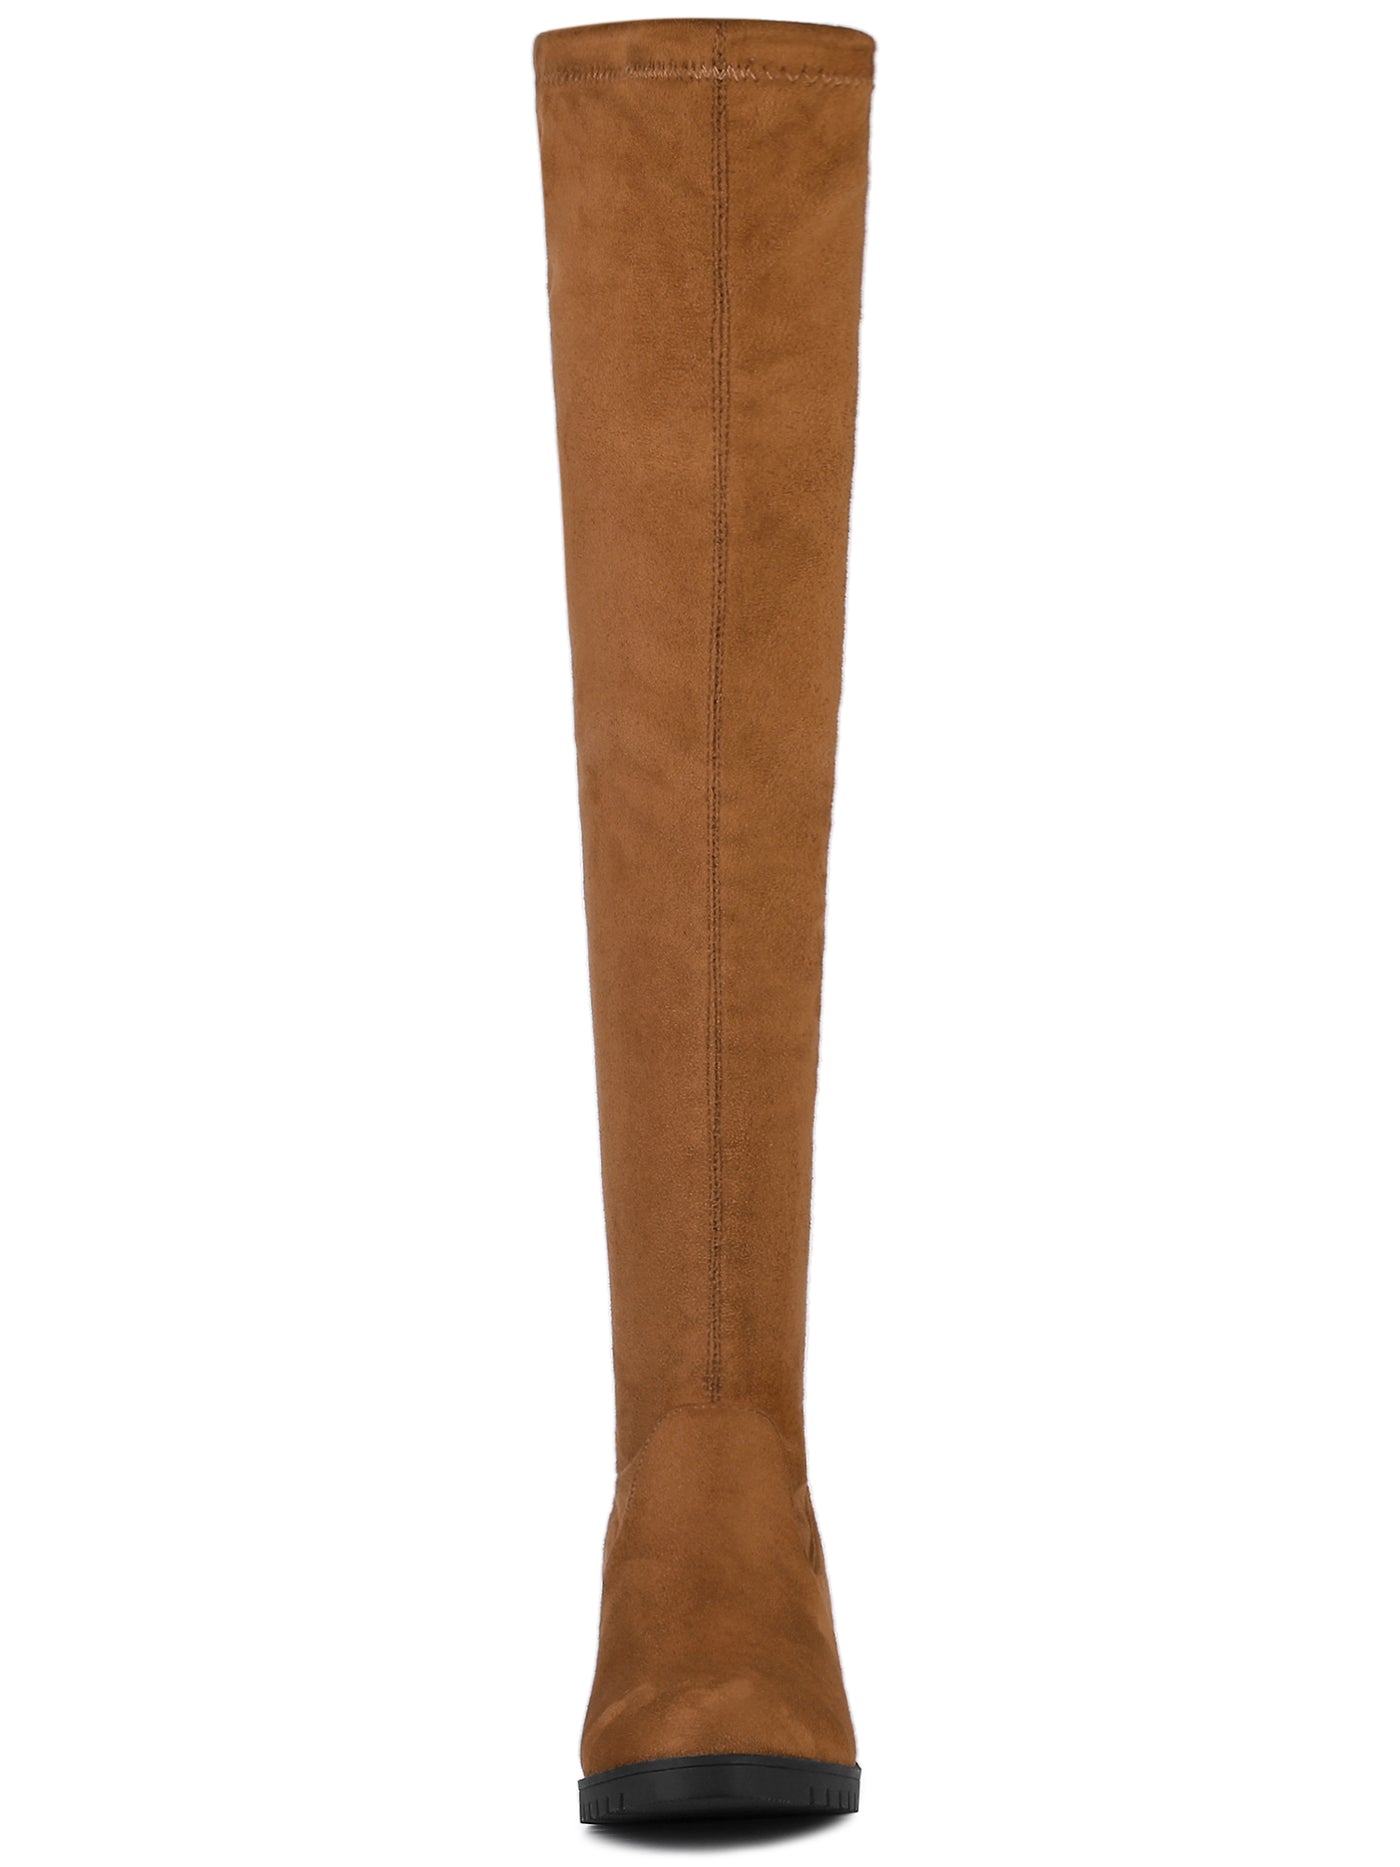 Allegra K Round Toe Chunky Heel Thigh High Over the Knee Boots